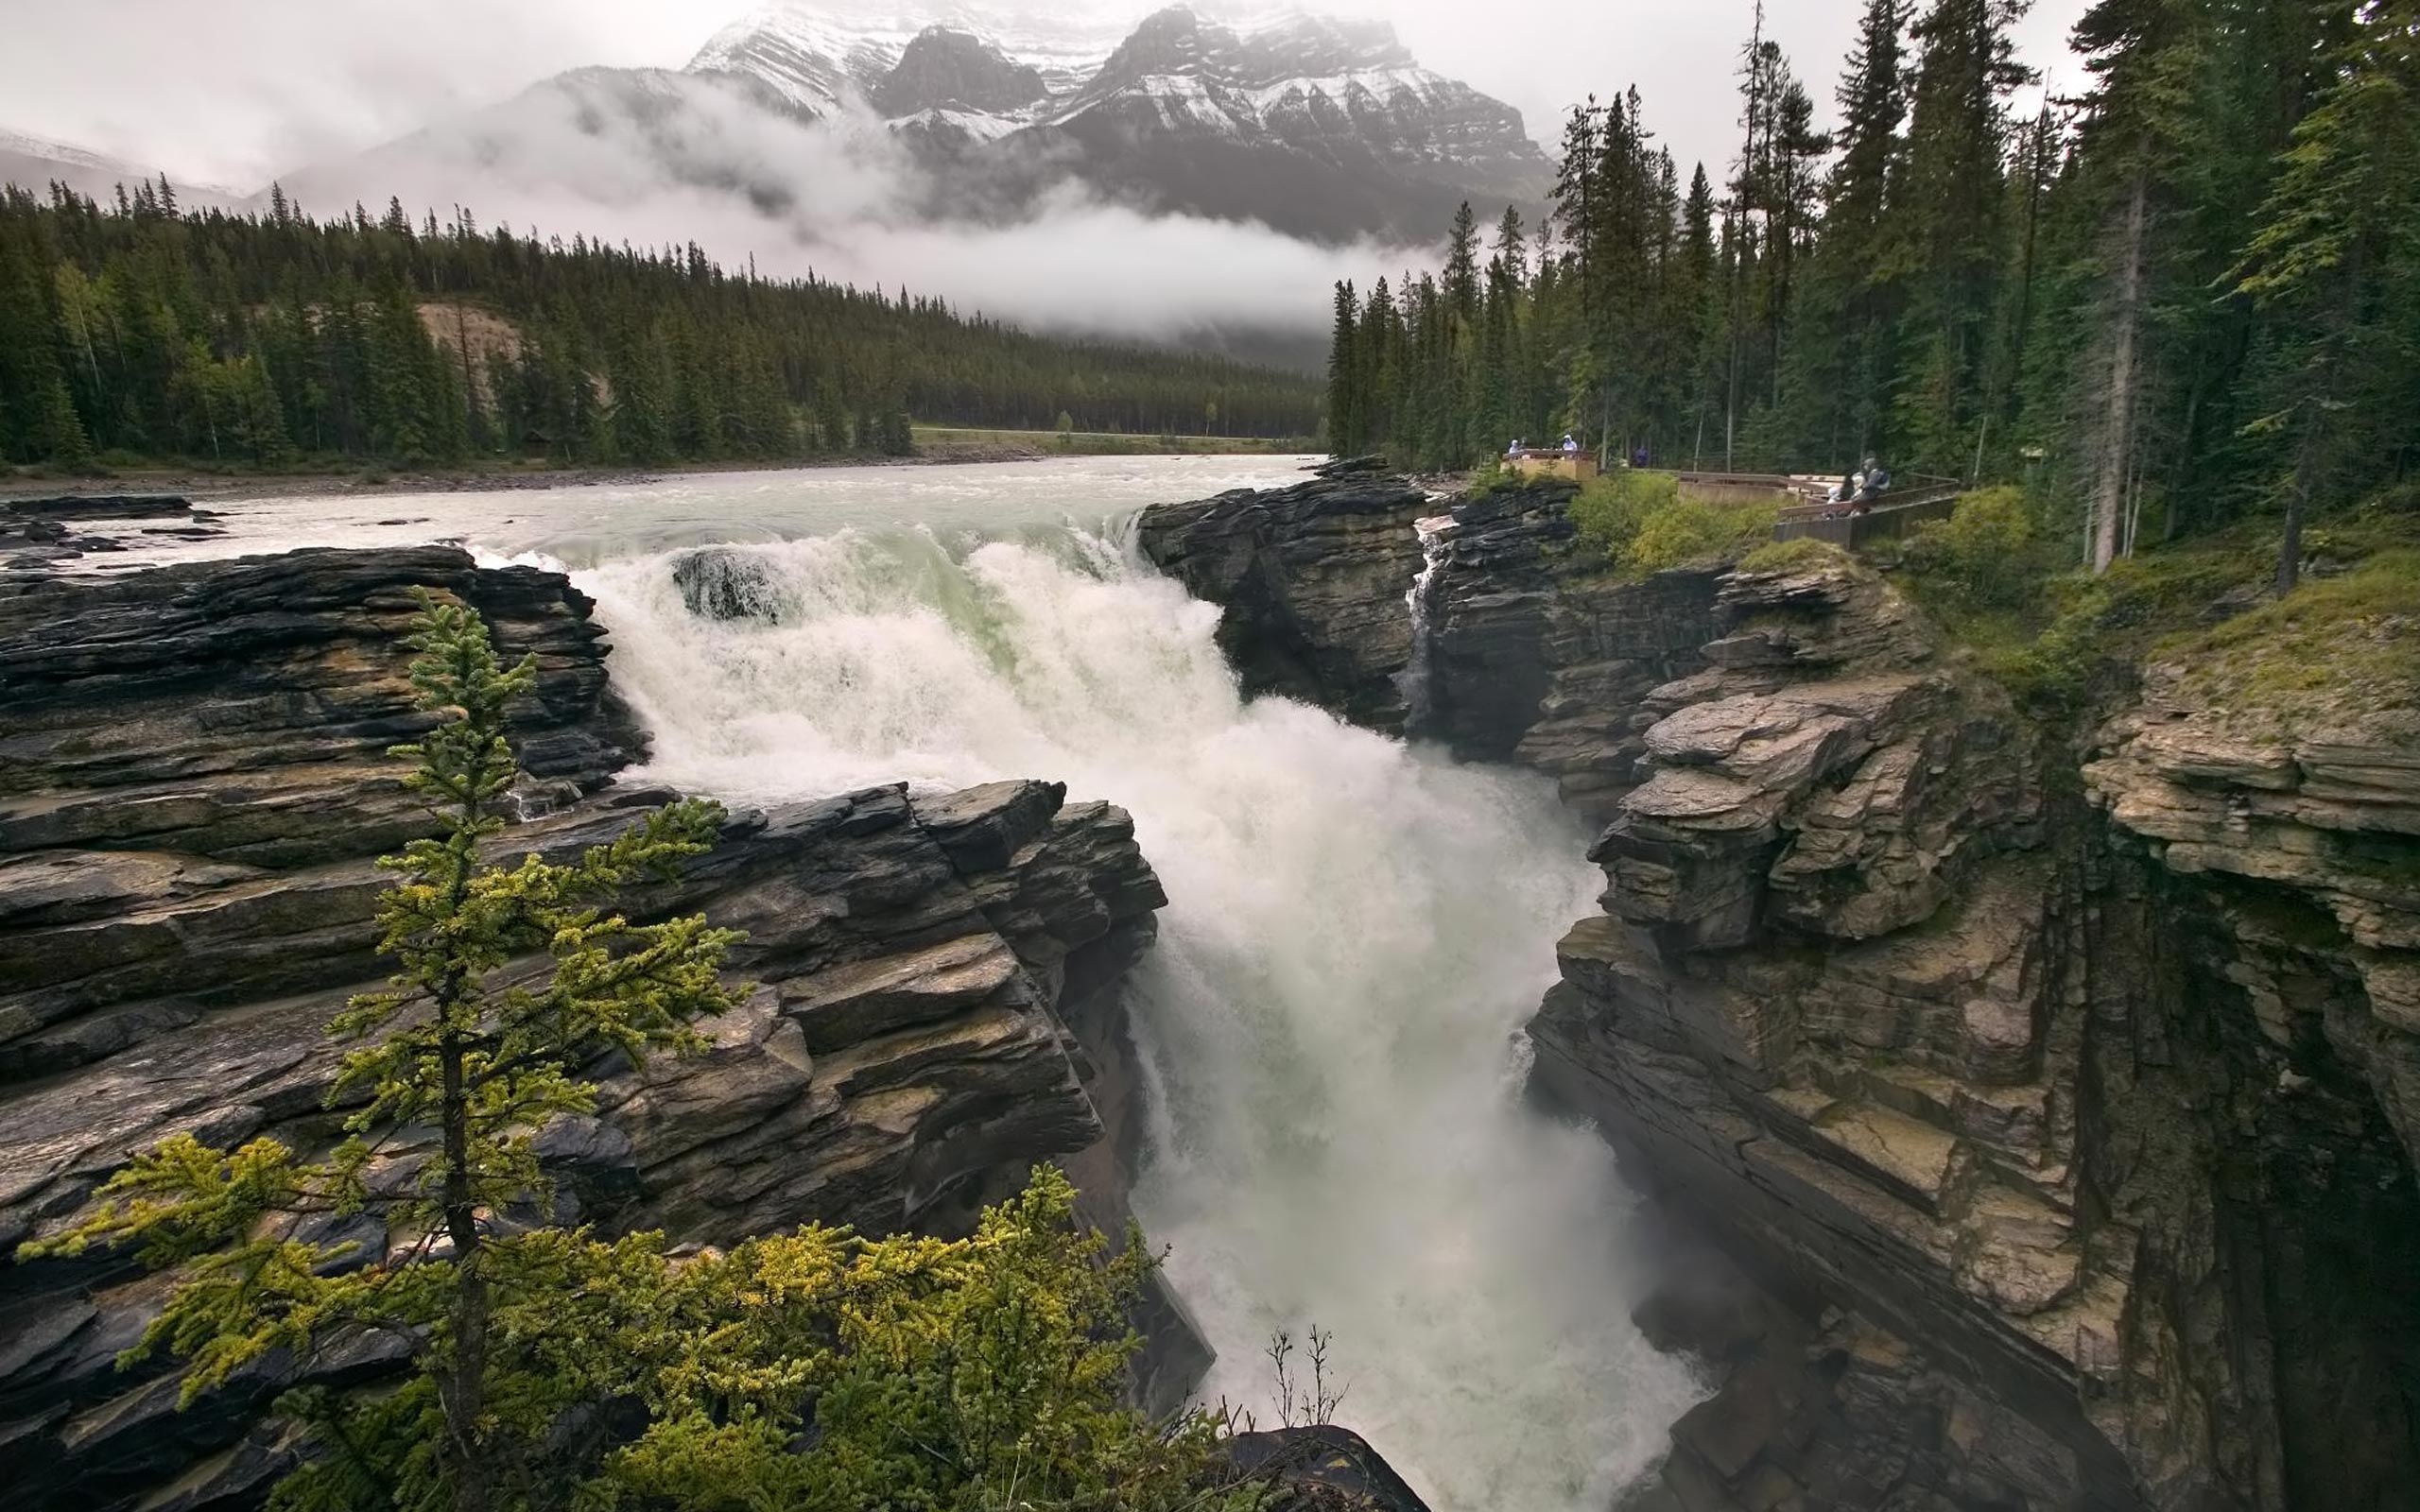 Scenic view of Athabasca Falls surrounded by nature and a flowing river.